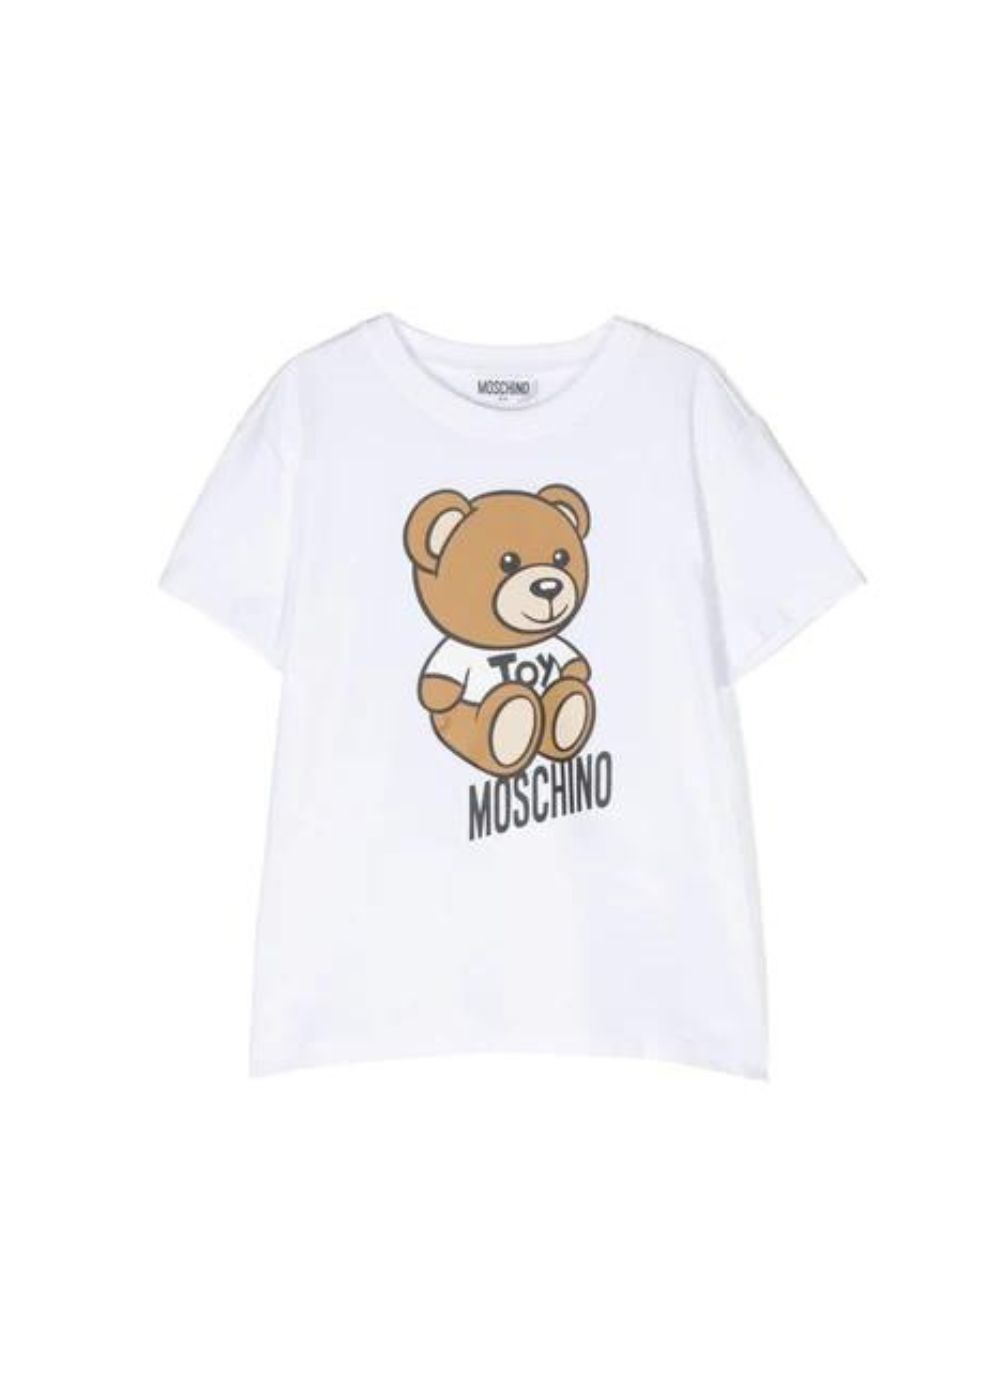 Featured image for “Moschino T-shirt Teddy Bear”